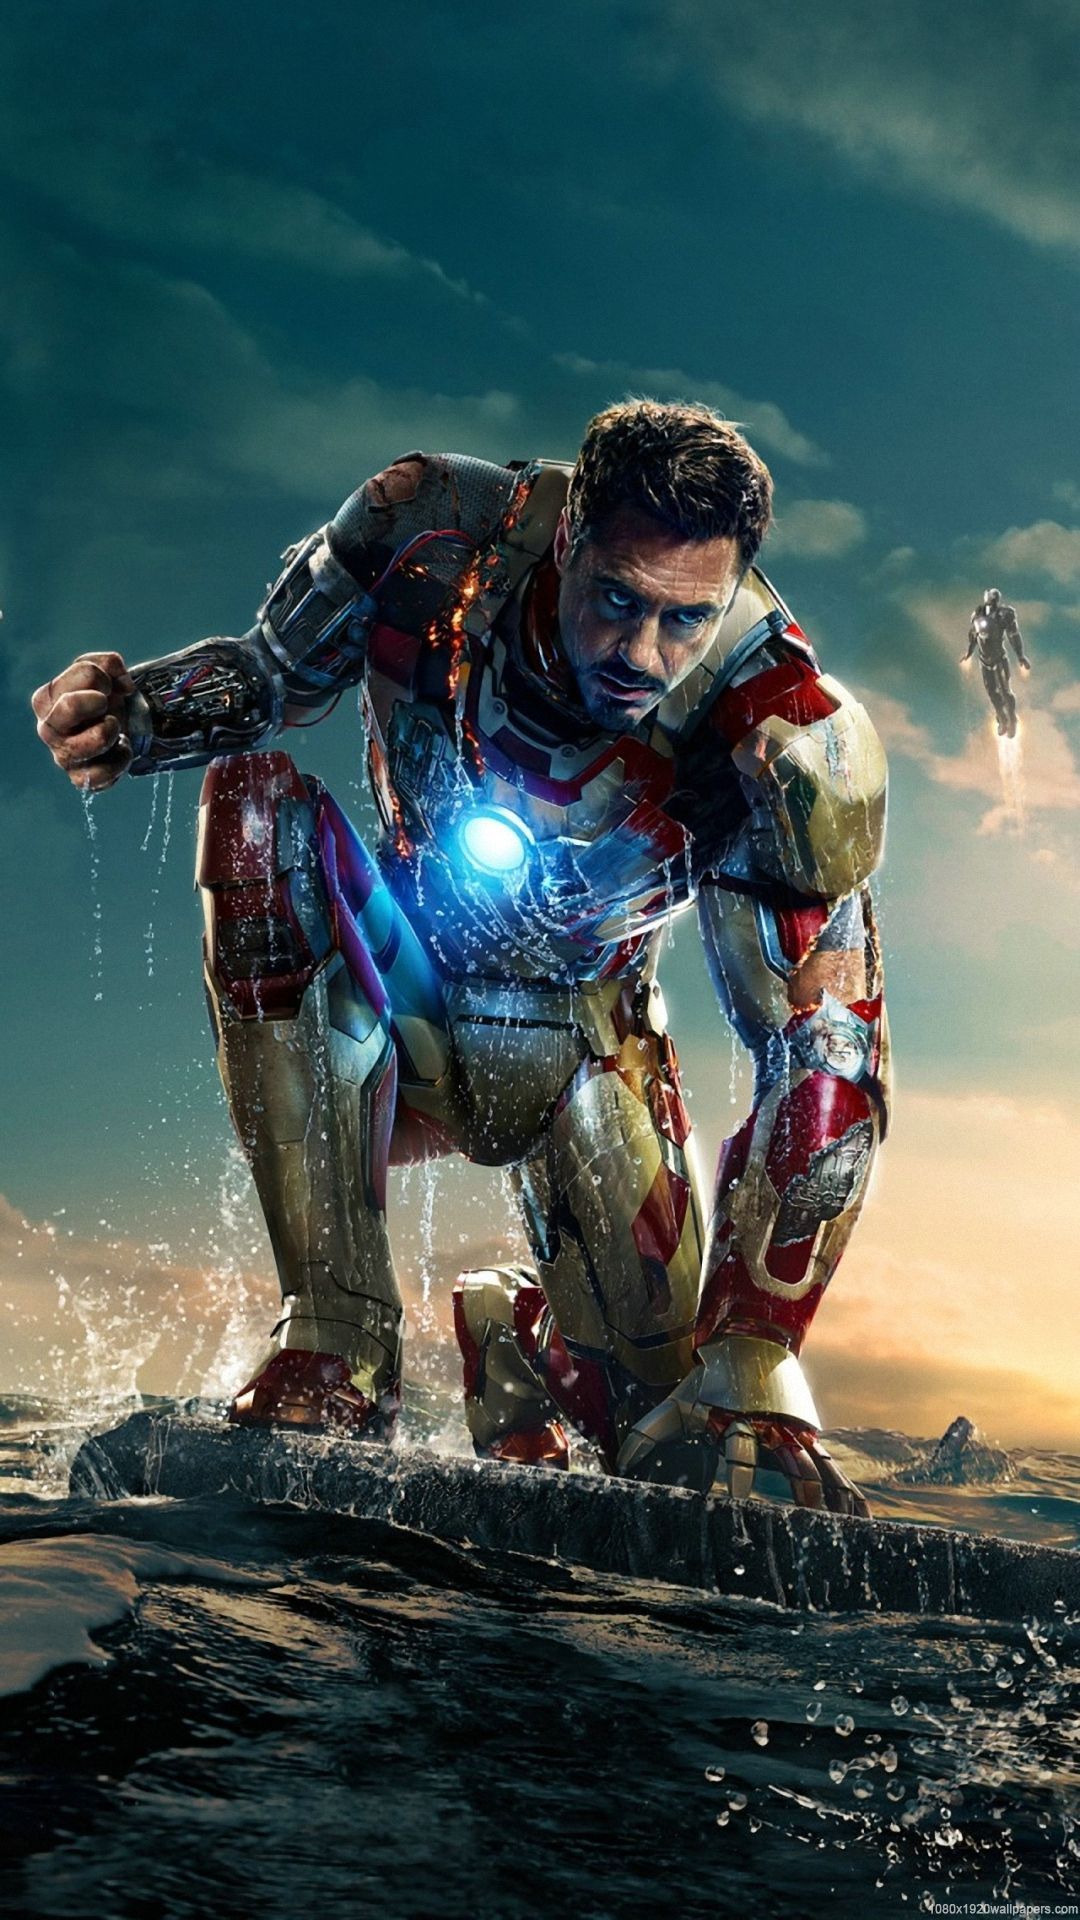 HD Wallpapers Of Iron Man 3